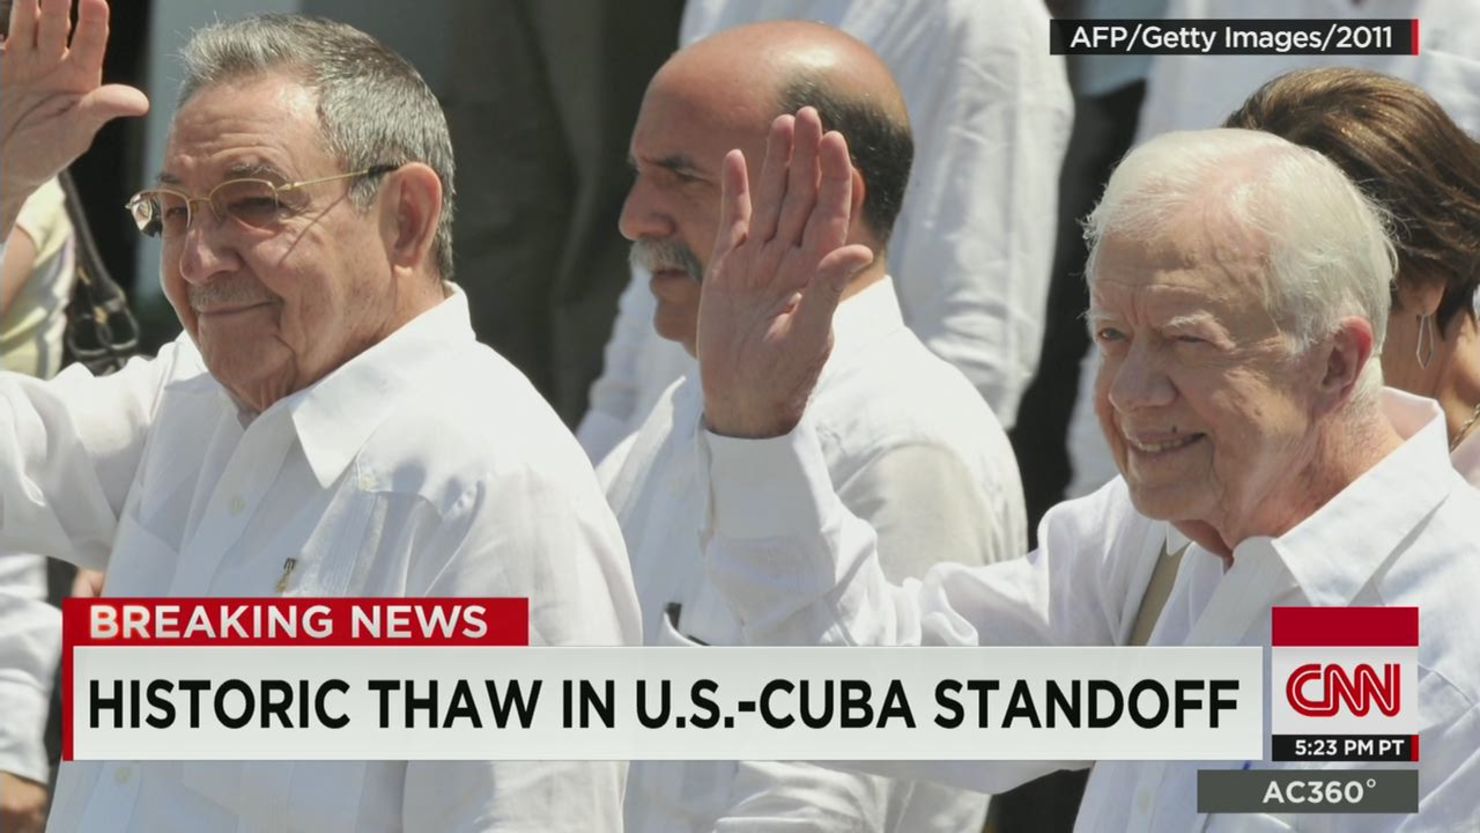 Former President Jimmy Carter appeared with Cuban President Raul Castro in 2011.